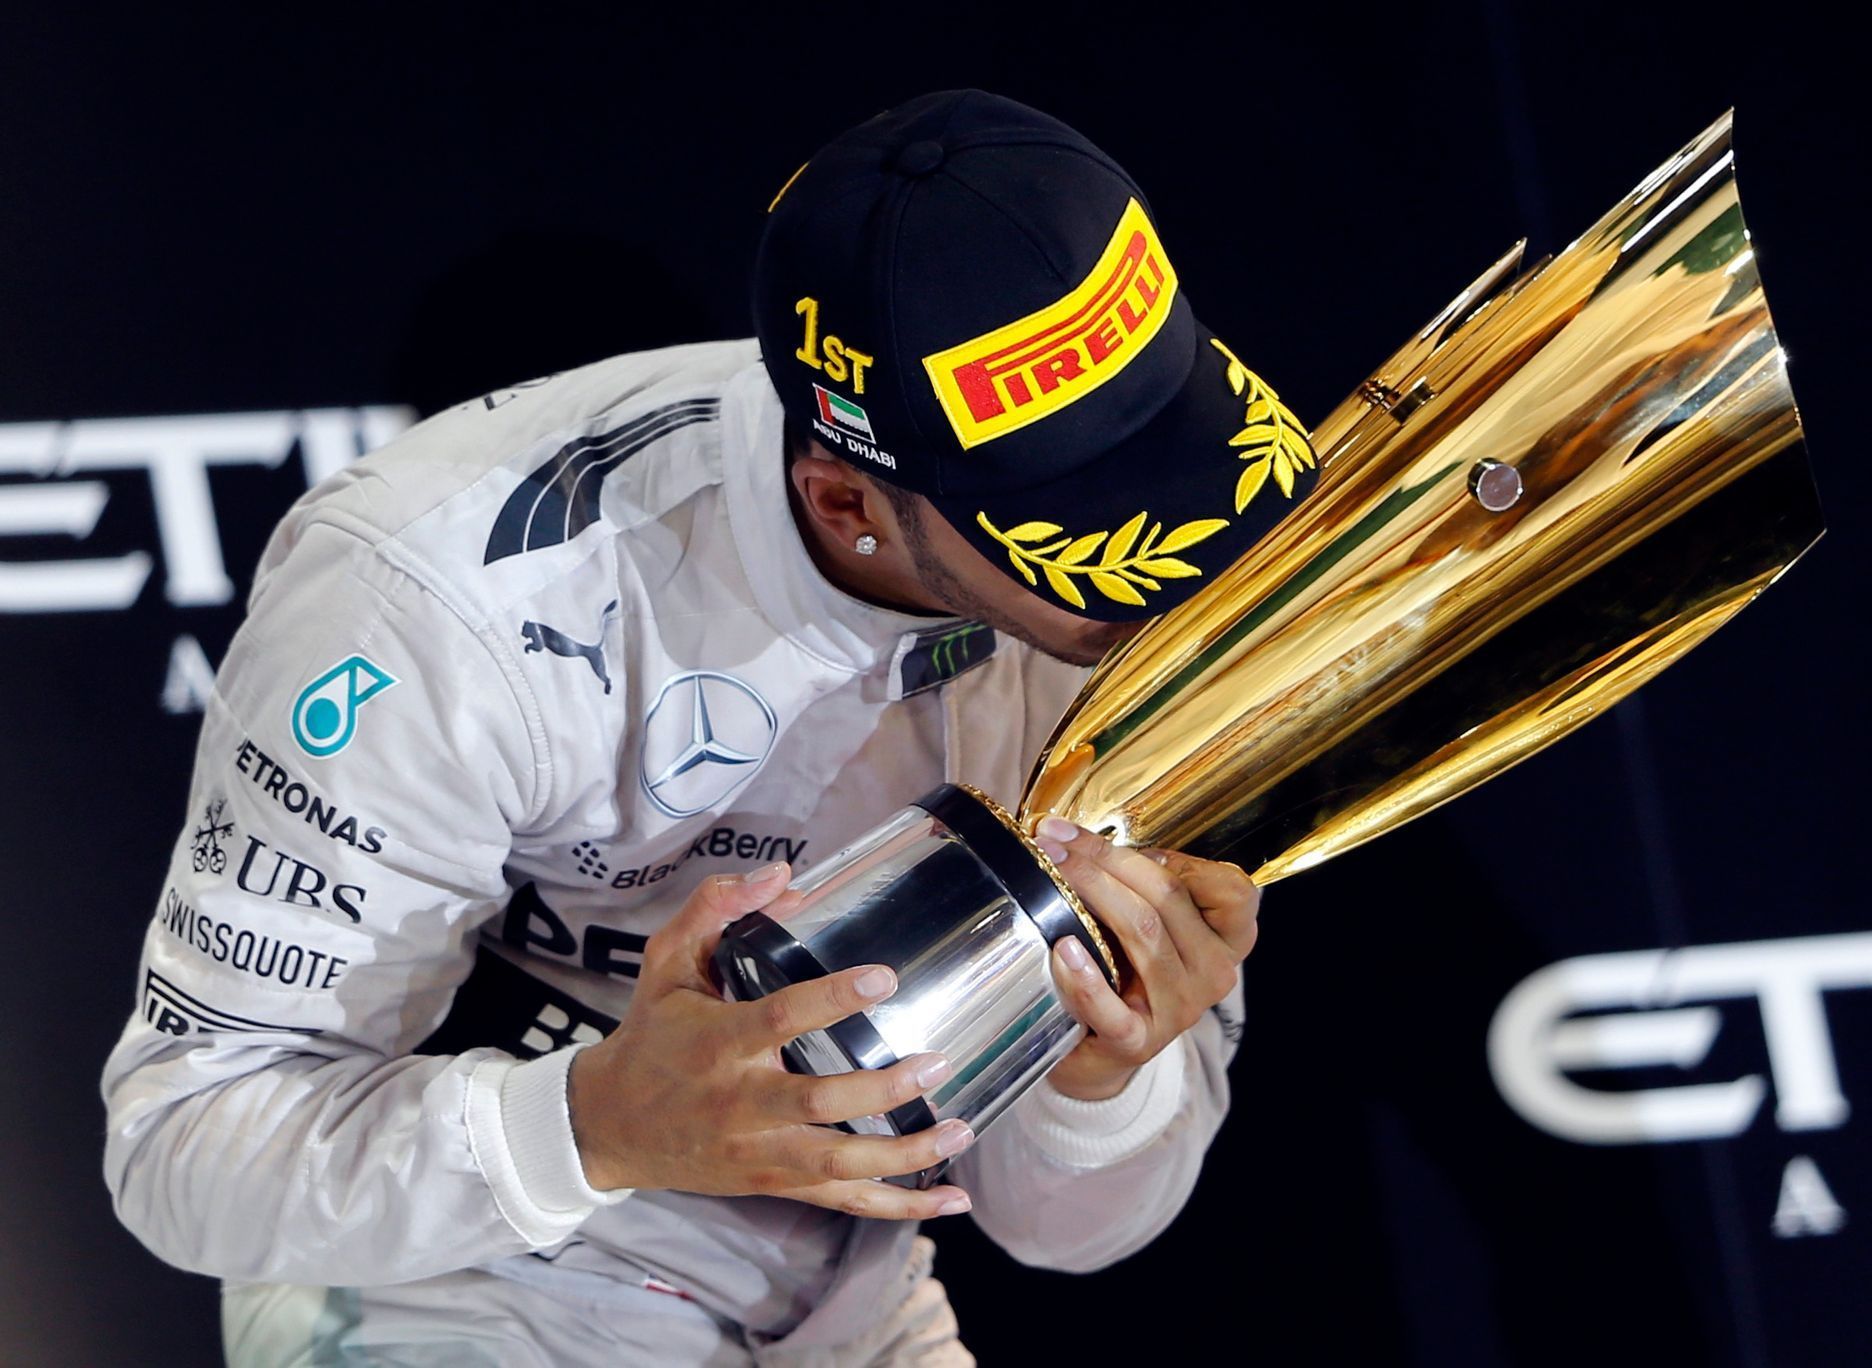 Mercedes Formula One driver Lewis Hamilton of Britain celebrates on the podium after winning the Abu Dhabi F1 Grand Prix at the Yas Marina circuit in Abu Dhab